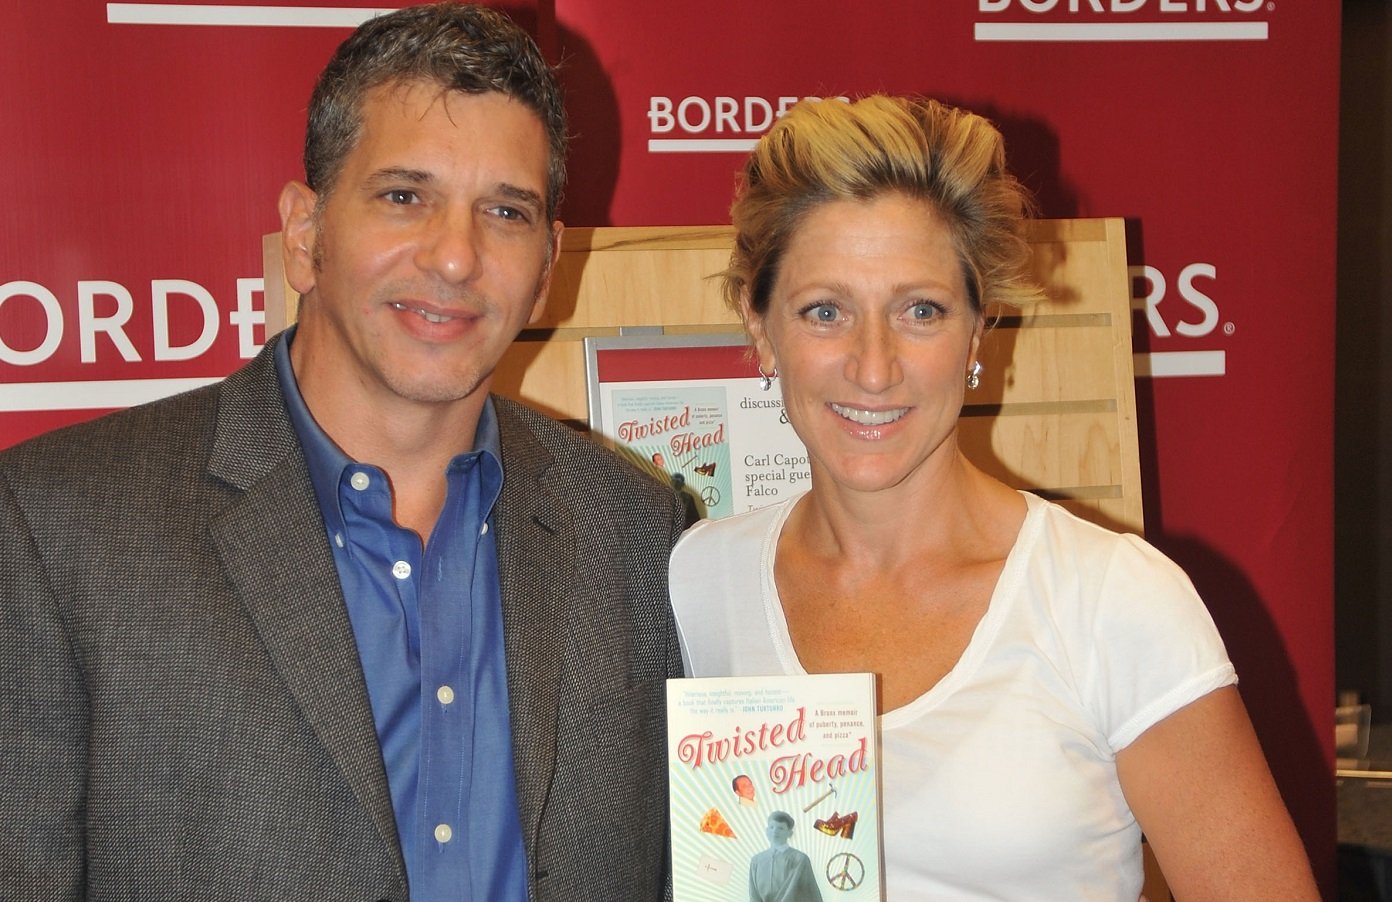 Carl Capotorto and Edie Falco smile for the camera at a book event in 2009